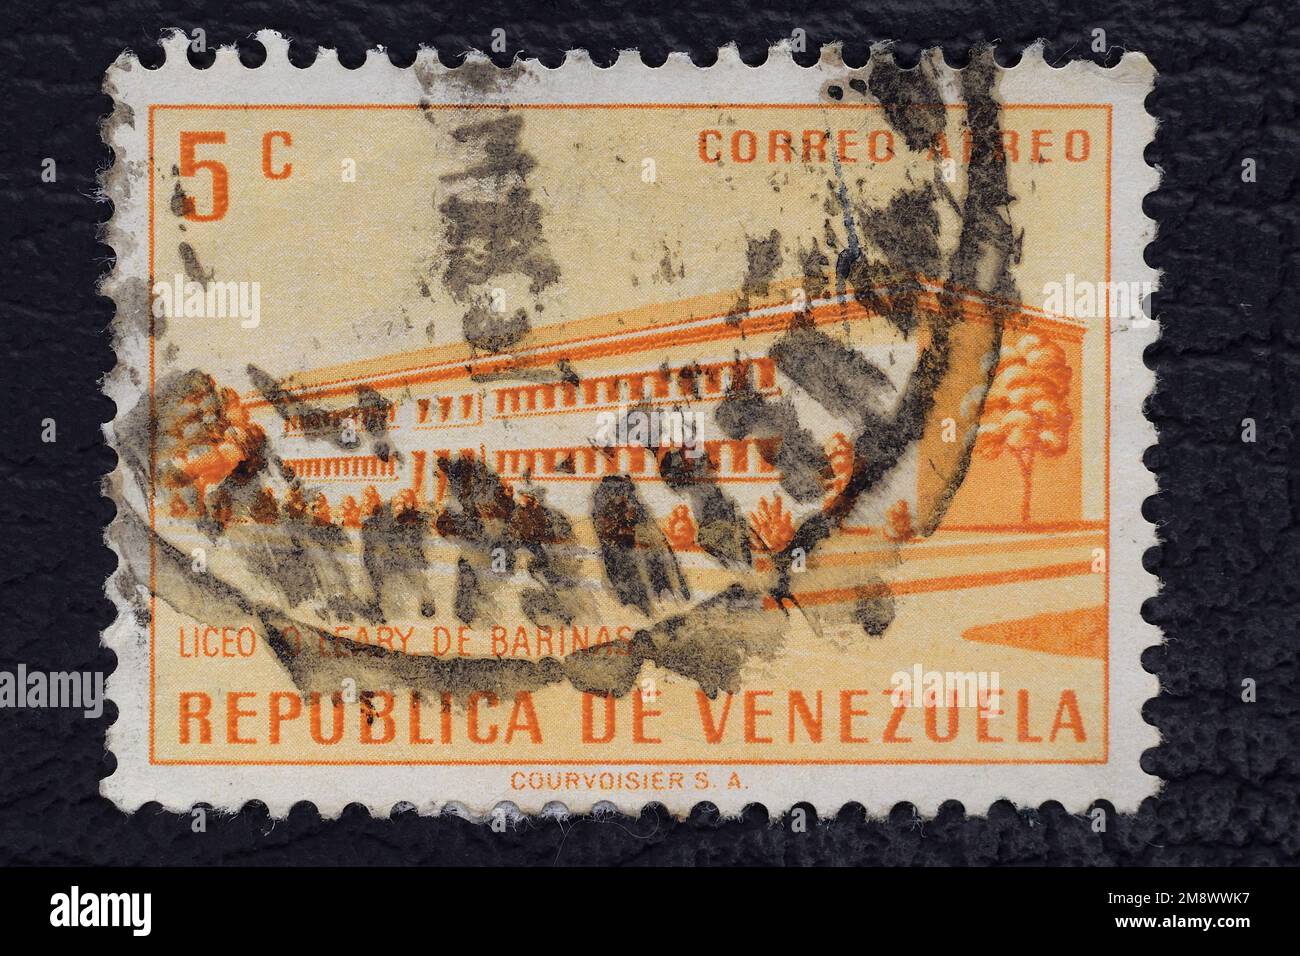 Valverde (CT), Italy - January 15, 2023: a old postage stamp from Venezuela showing the liceo o'leary de barinas Stock Photo